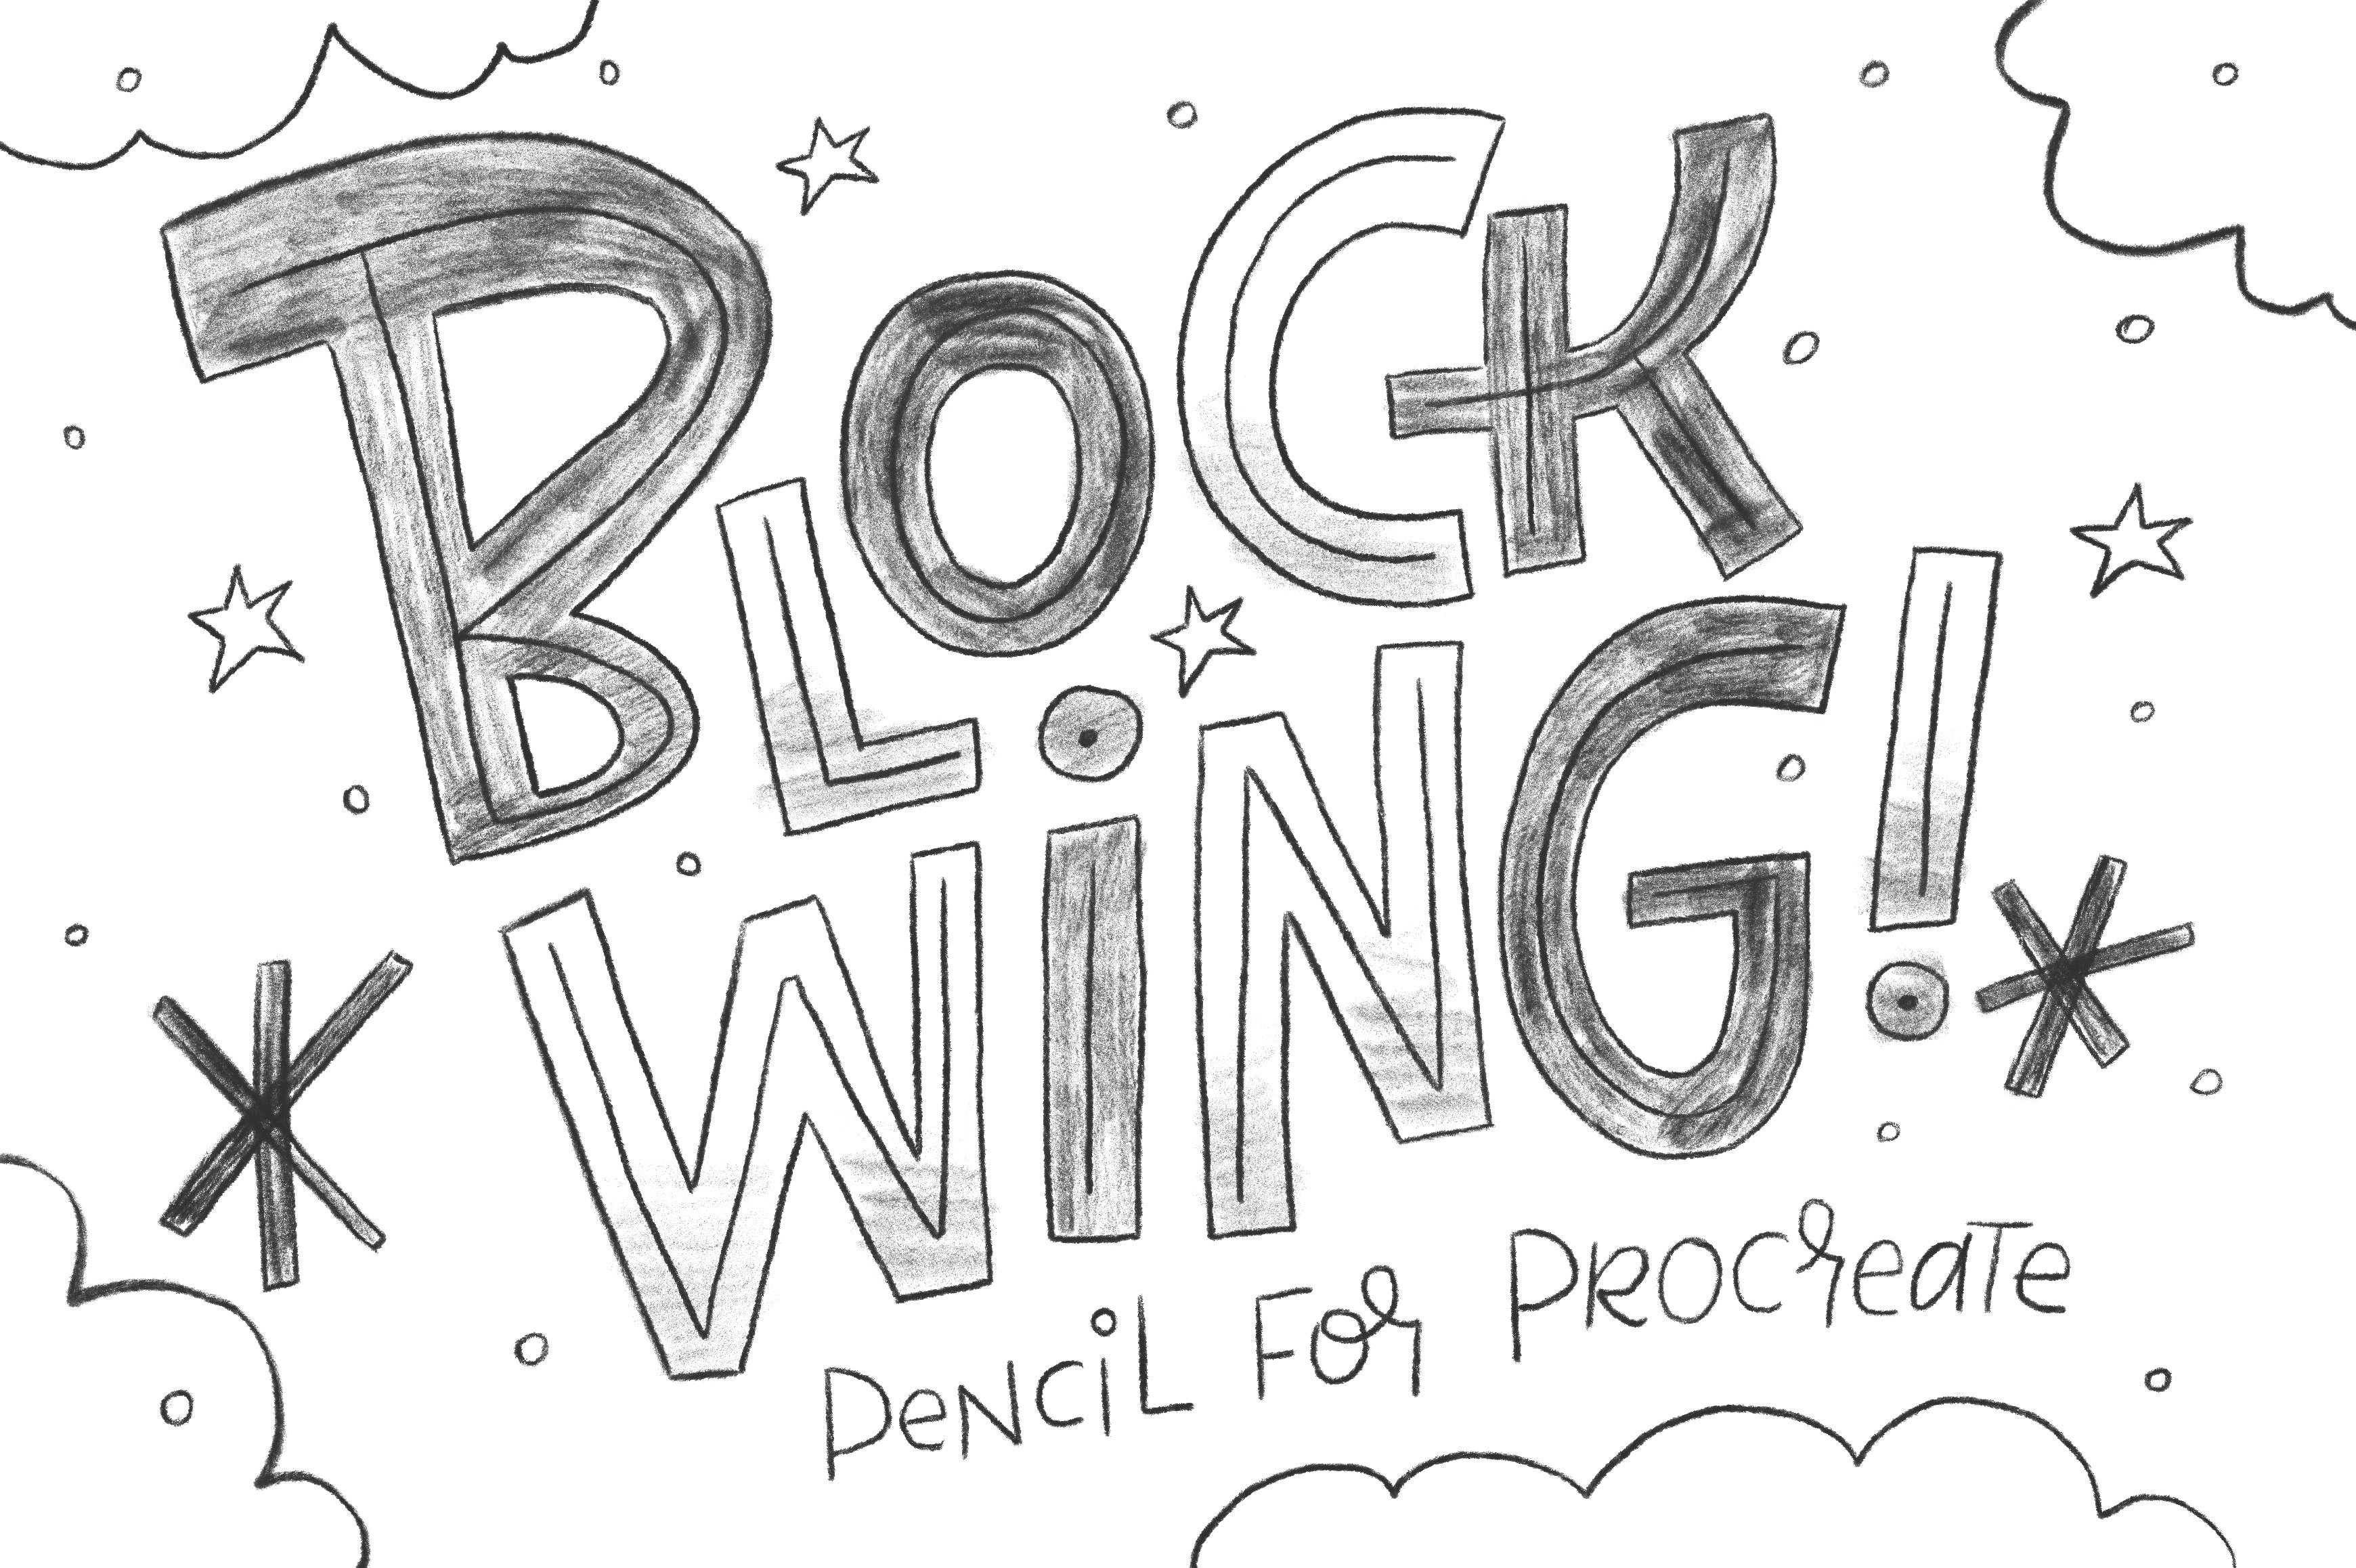 Blockwing Procreate Pencil Brushes preview image.